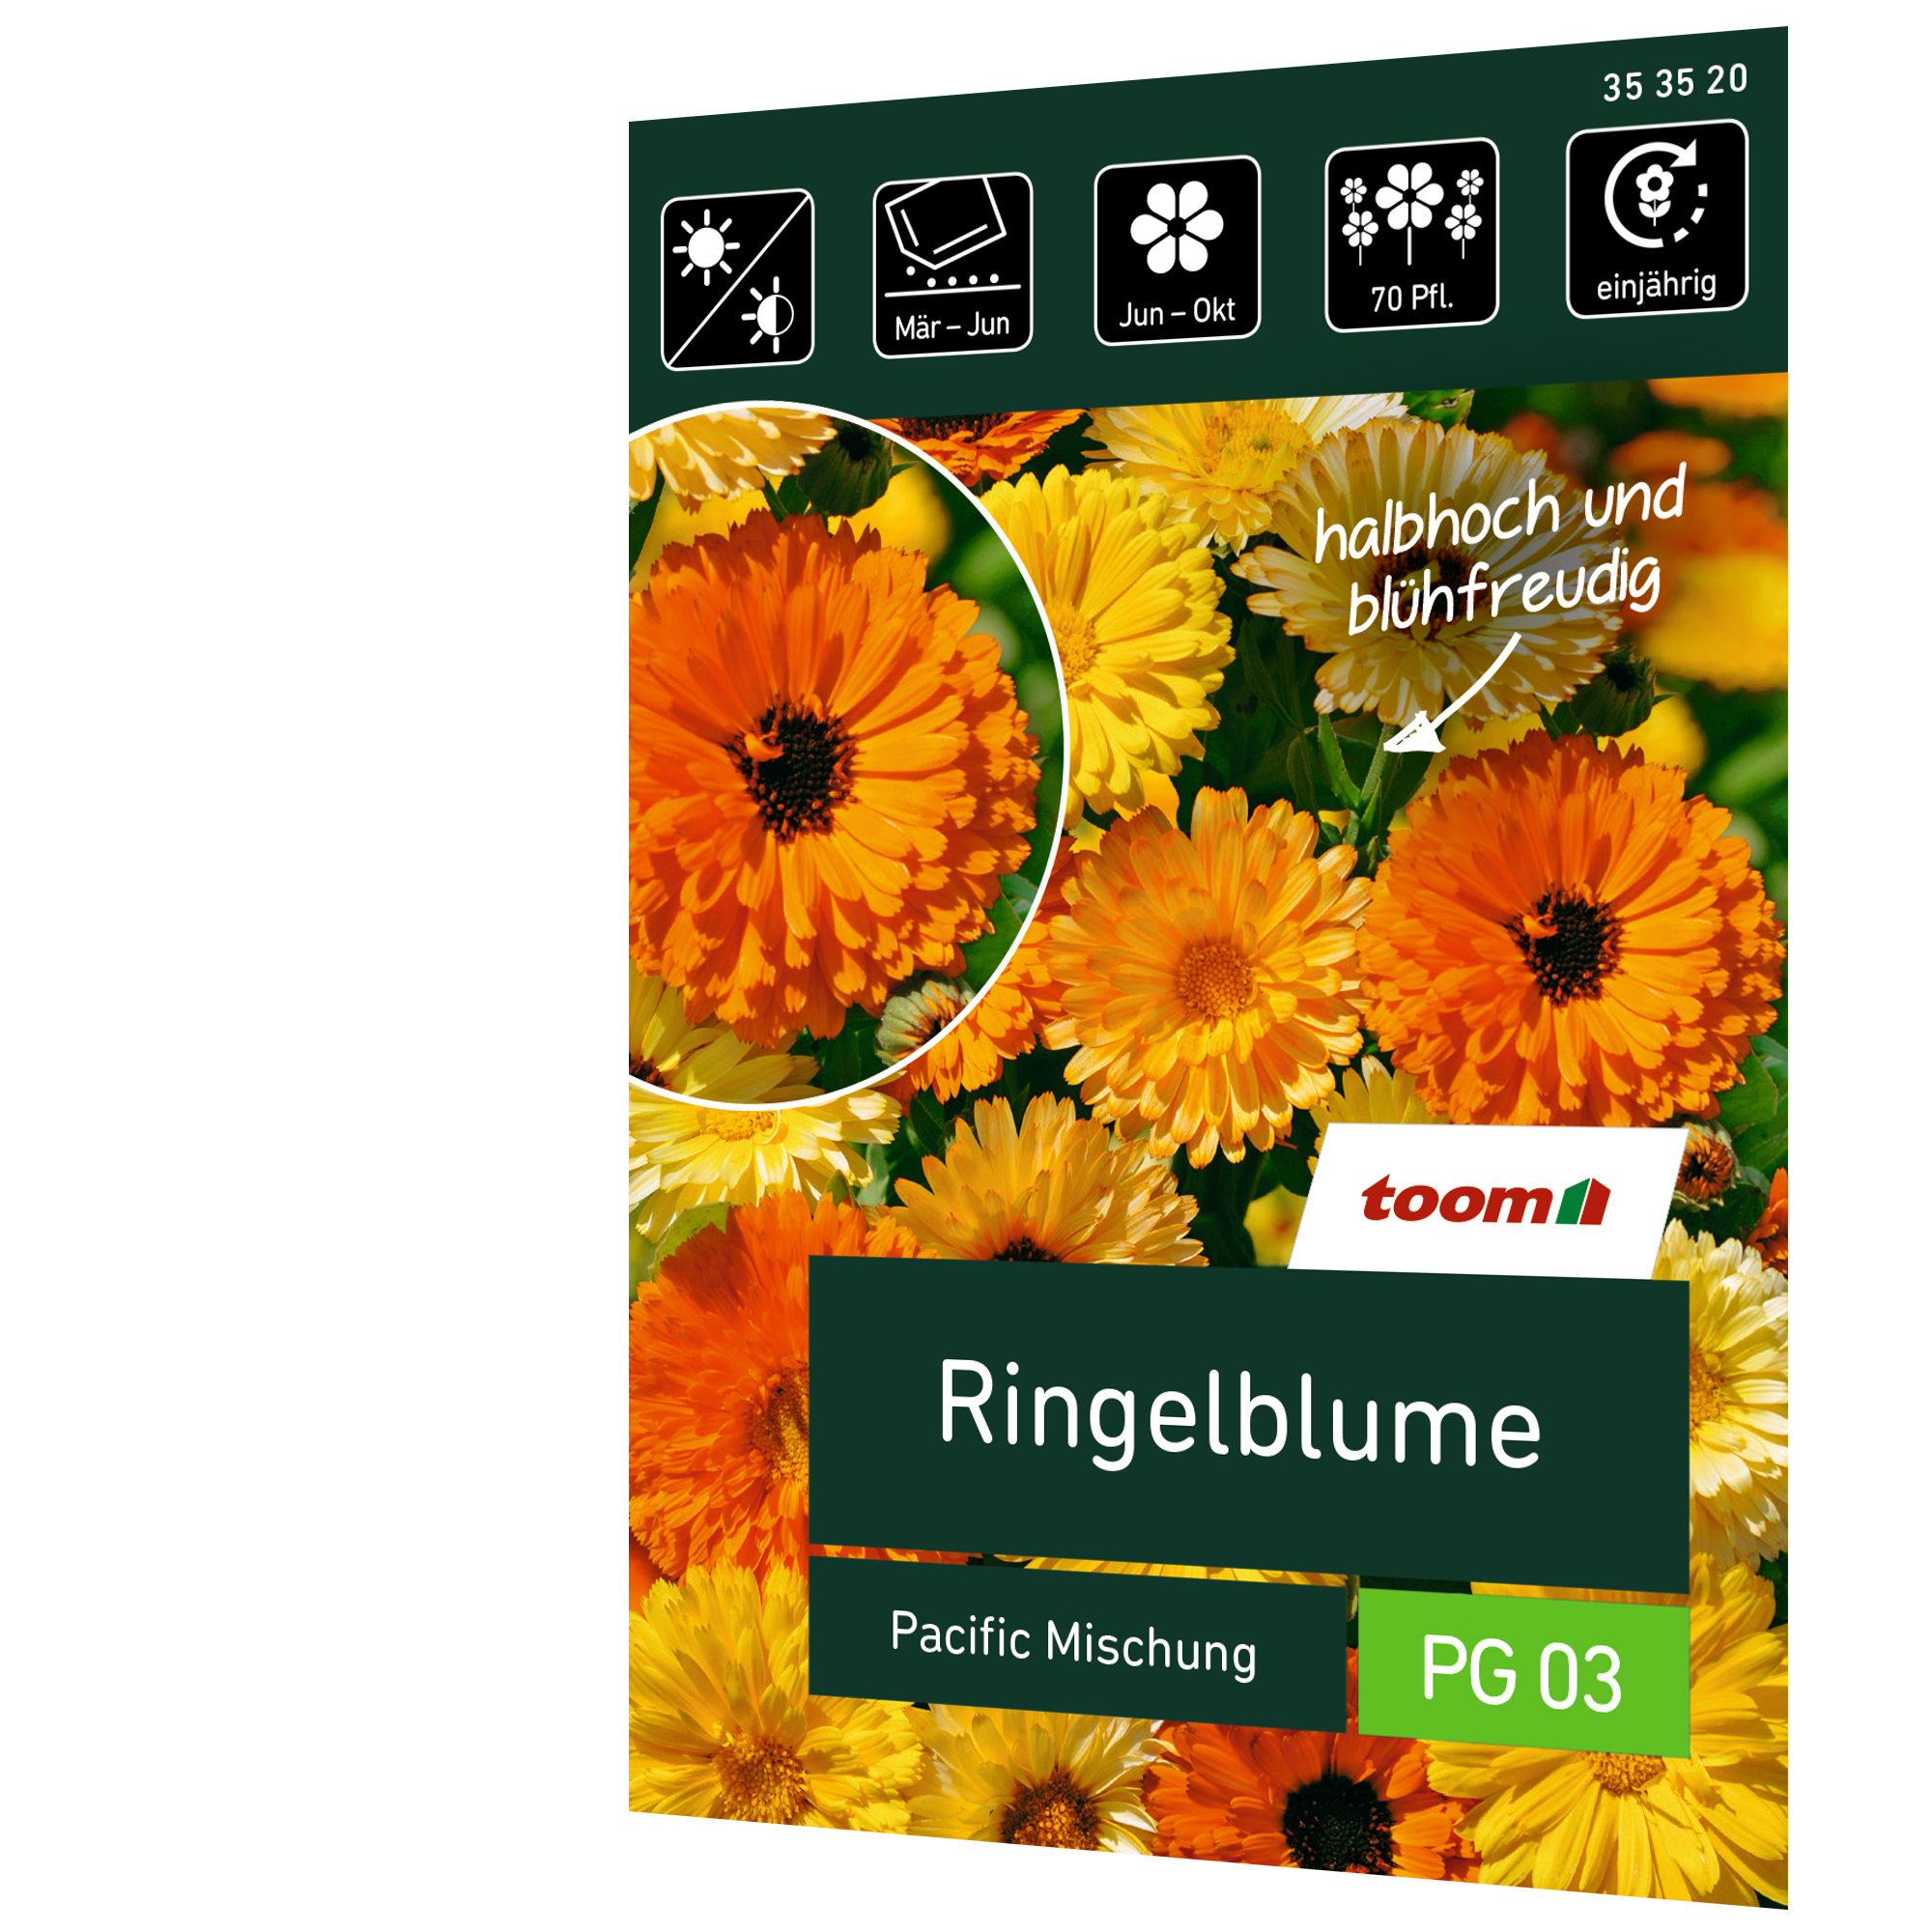 Ringelblume 'Pacific Mischung' + product picture